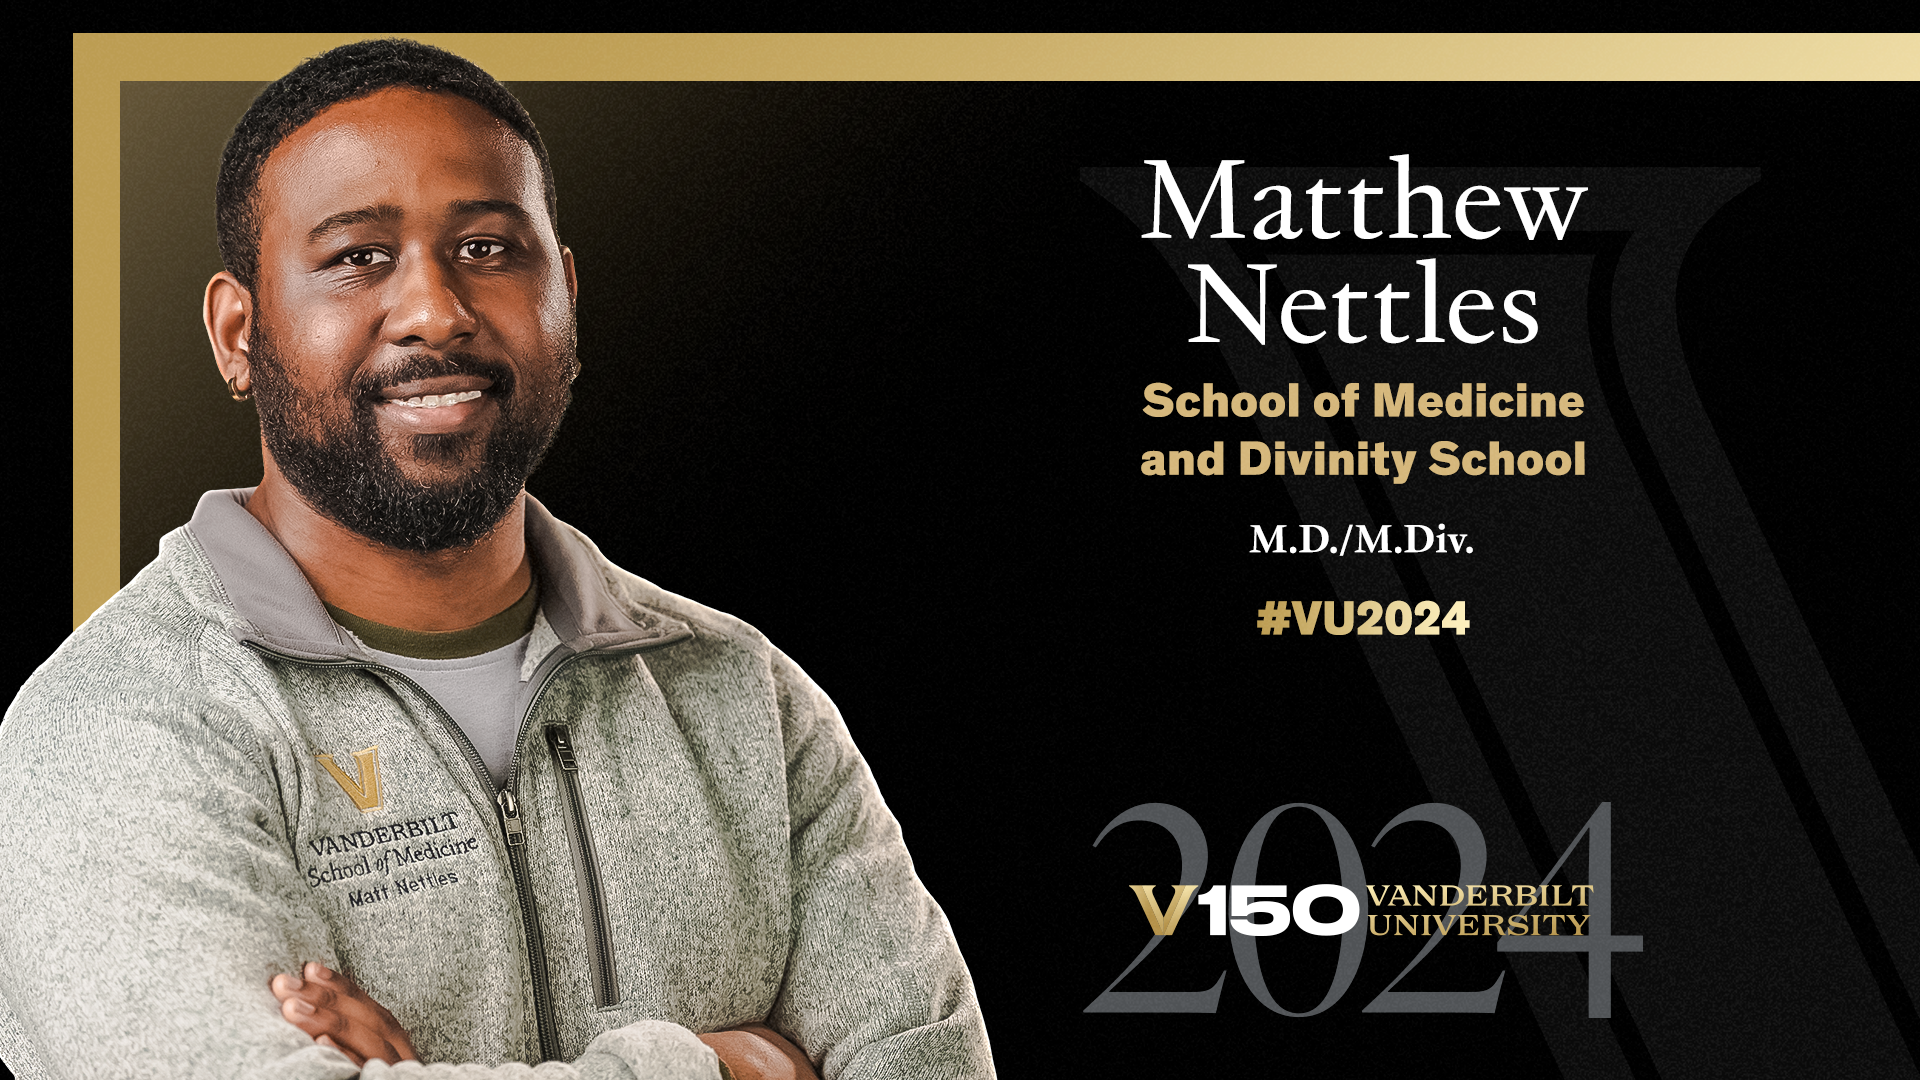 CLASS of 2024: Military veteran Matthew Nettles combines degrees in medicine and divinity to treat human suffering